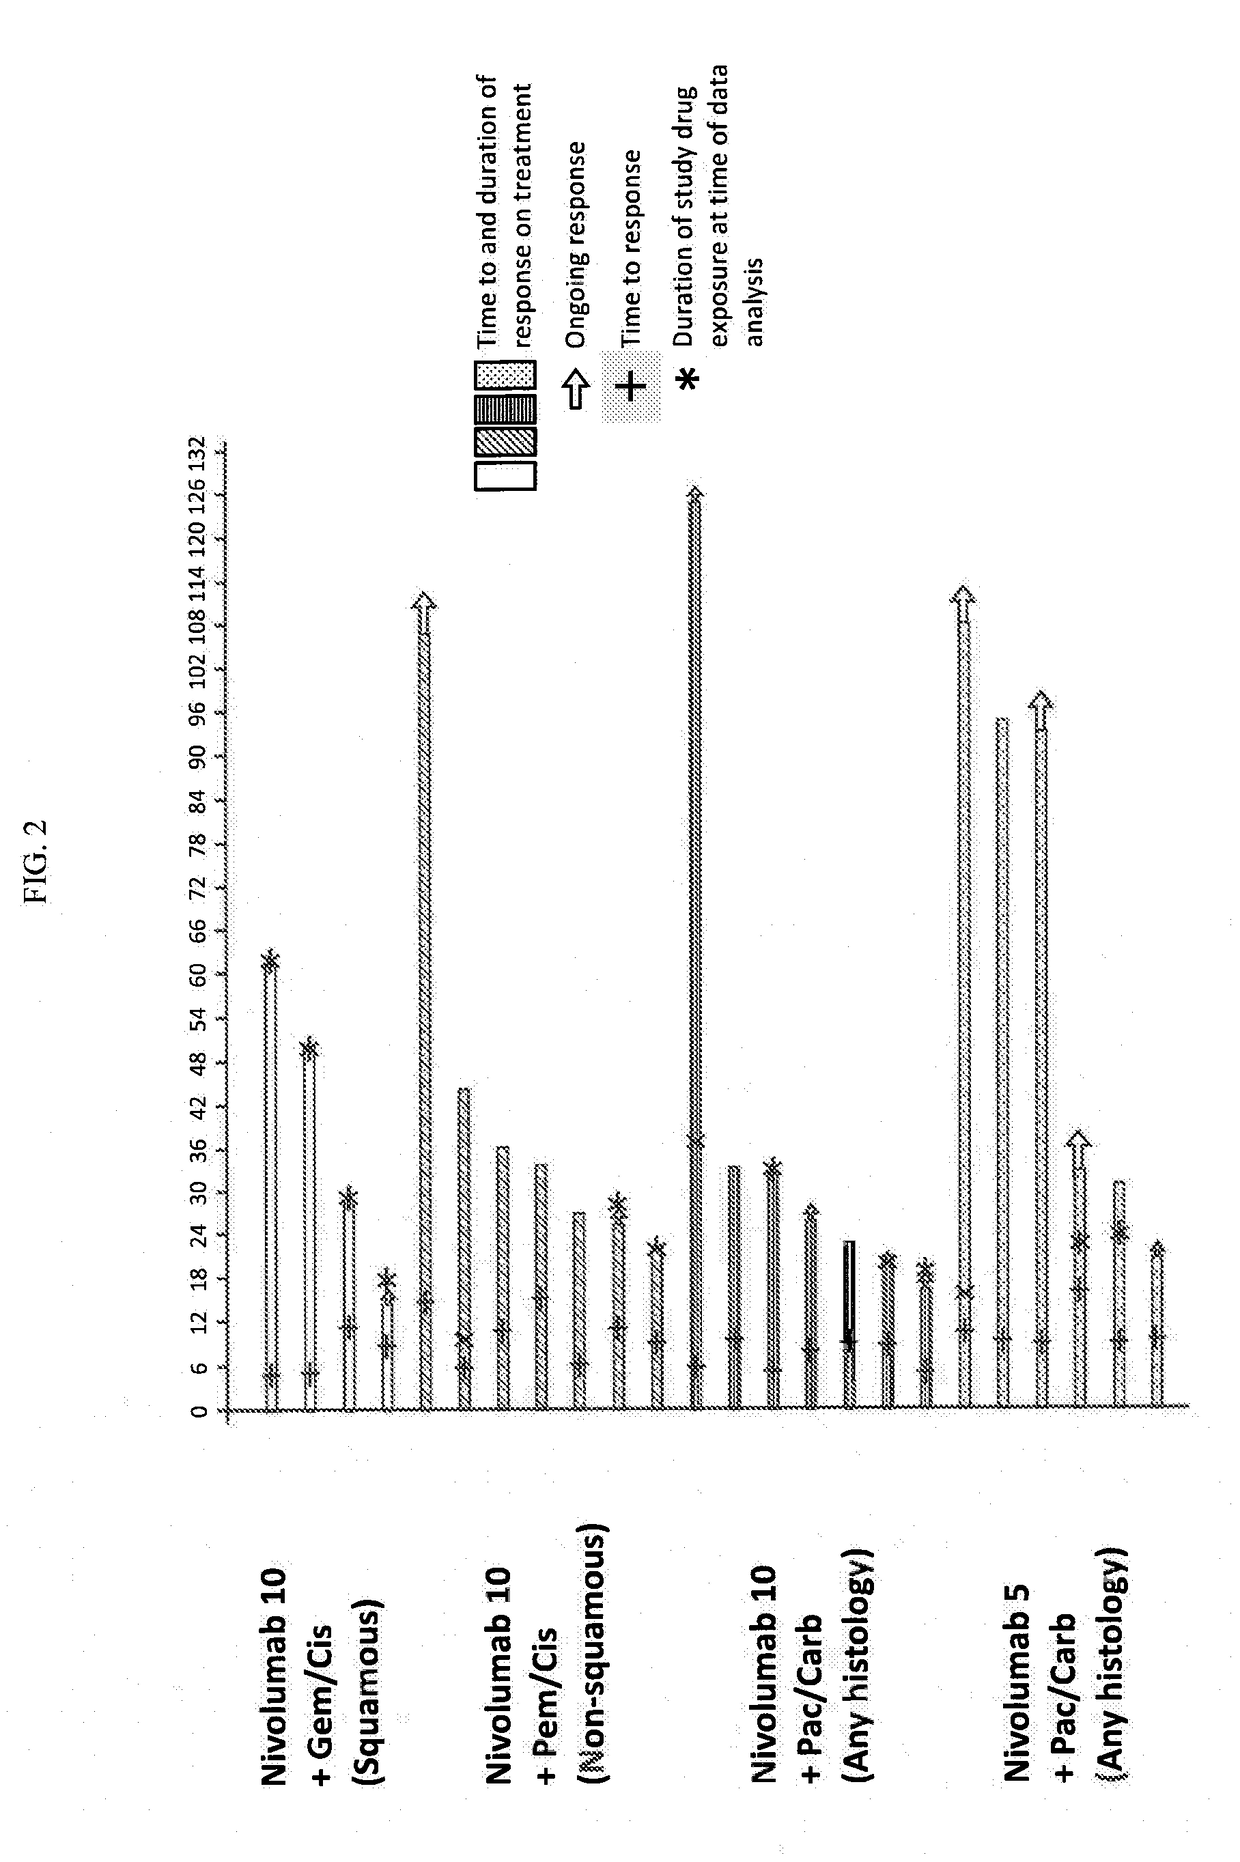 Treatment of lung cancer using a combination of an Anti-pd-1 antibody and another Anti-cancer agent